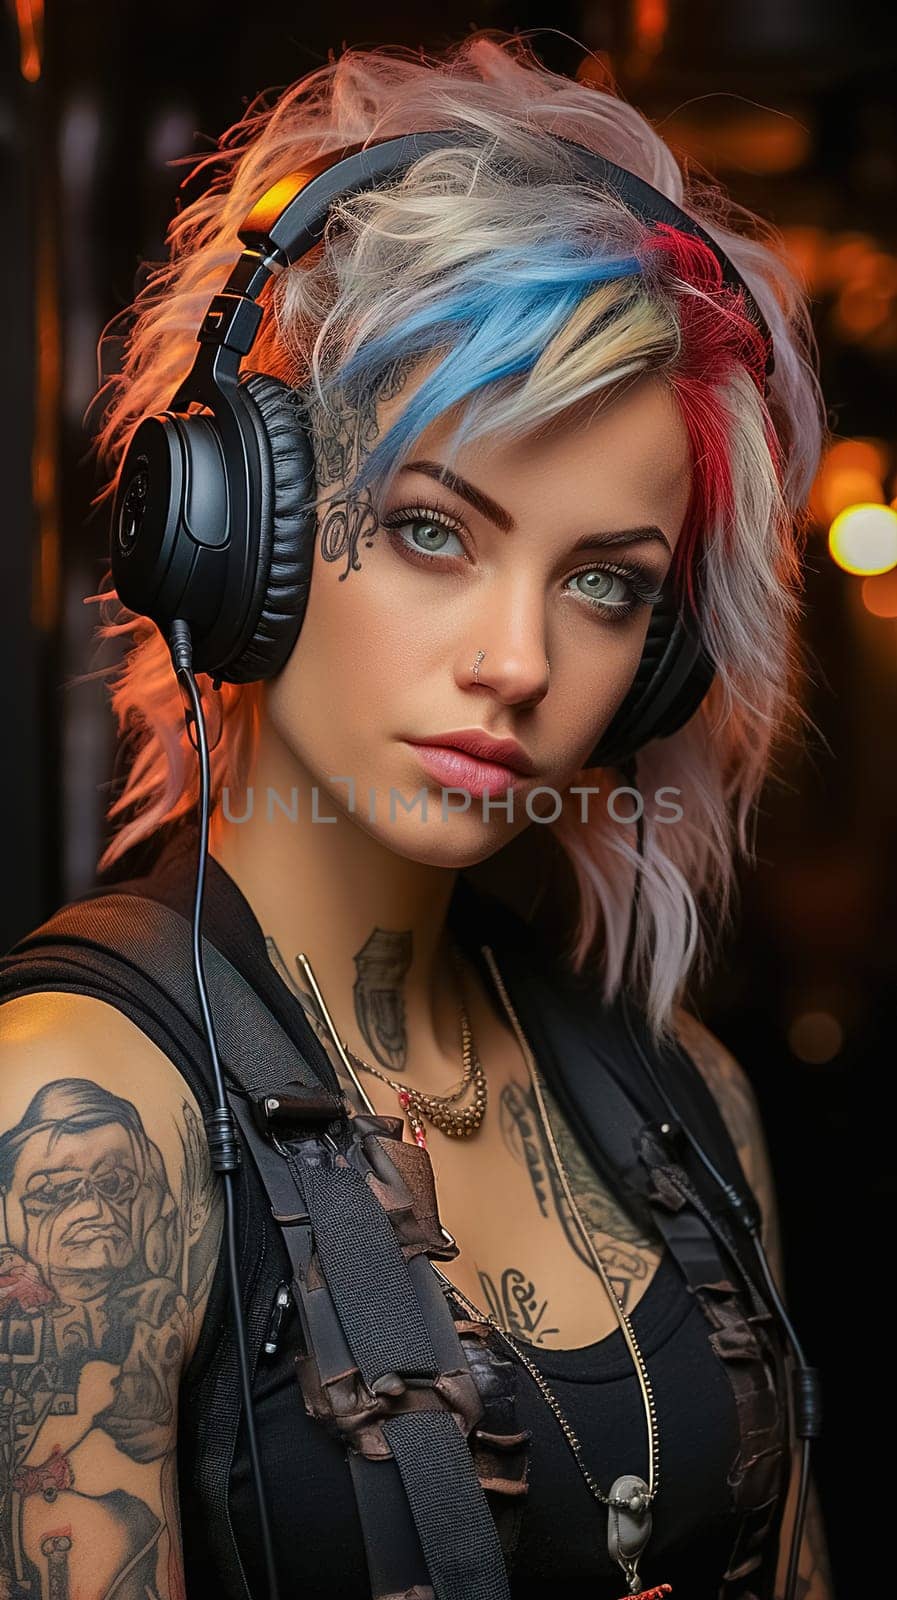 A girl with tattoos and multi-colored hair listens to music on headphones. High quality illustration